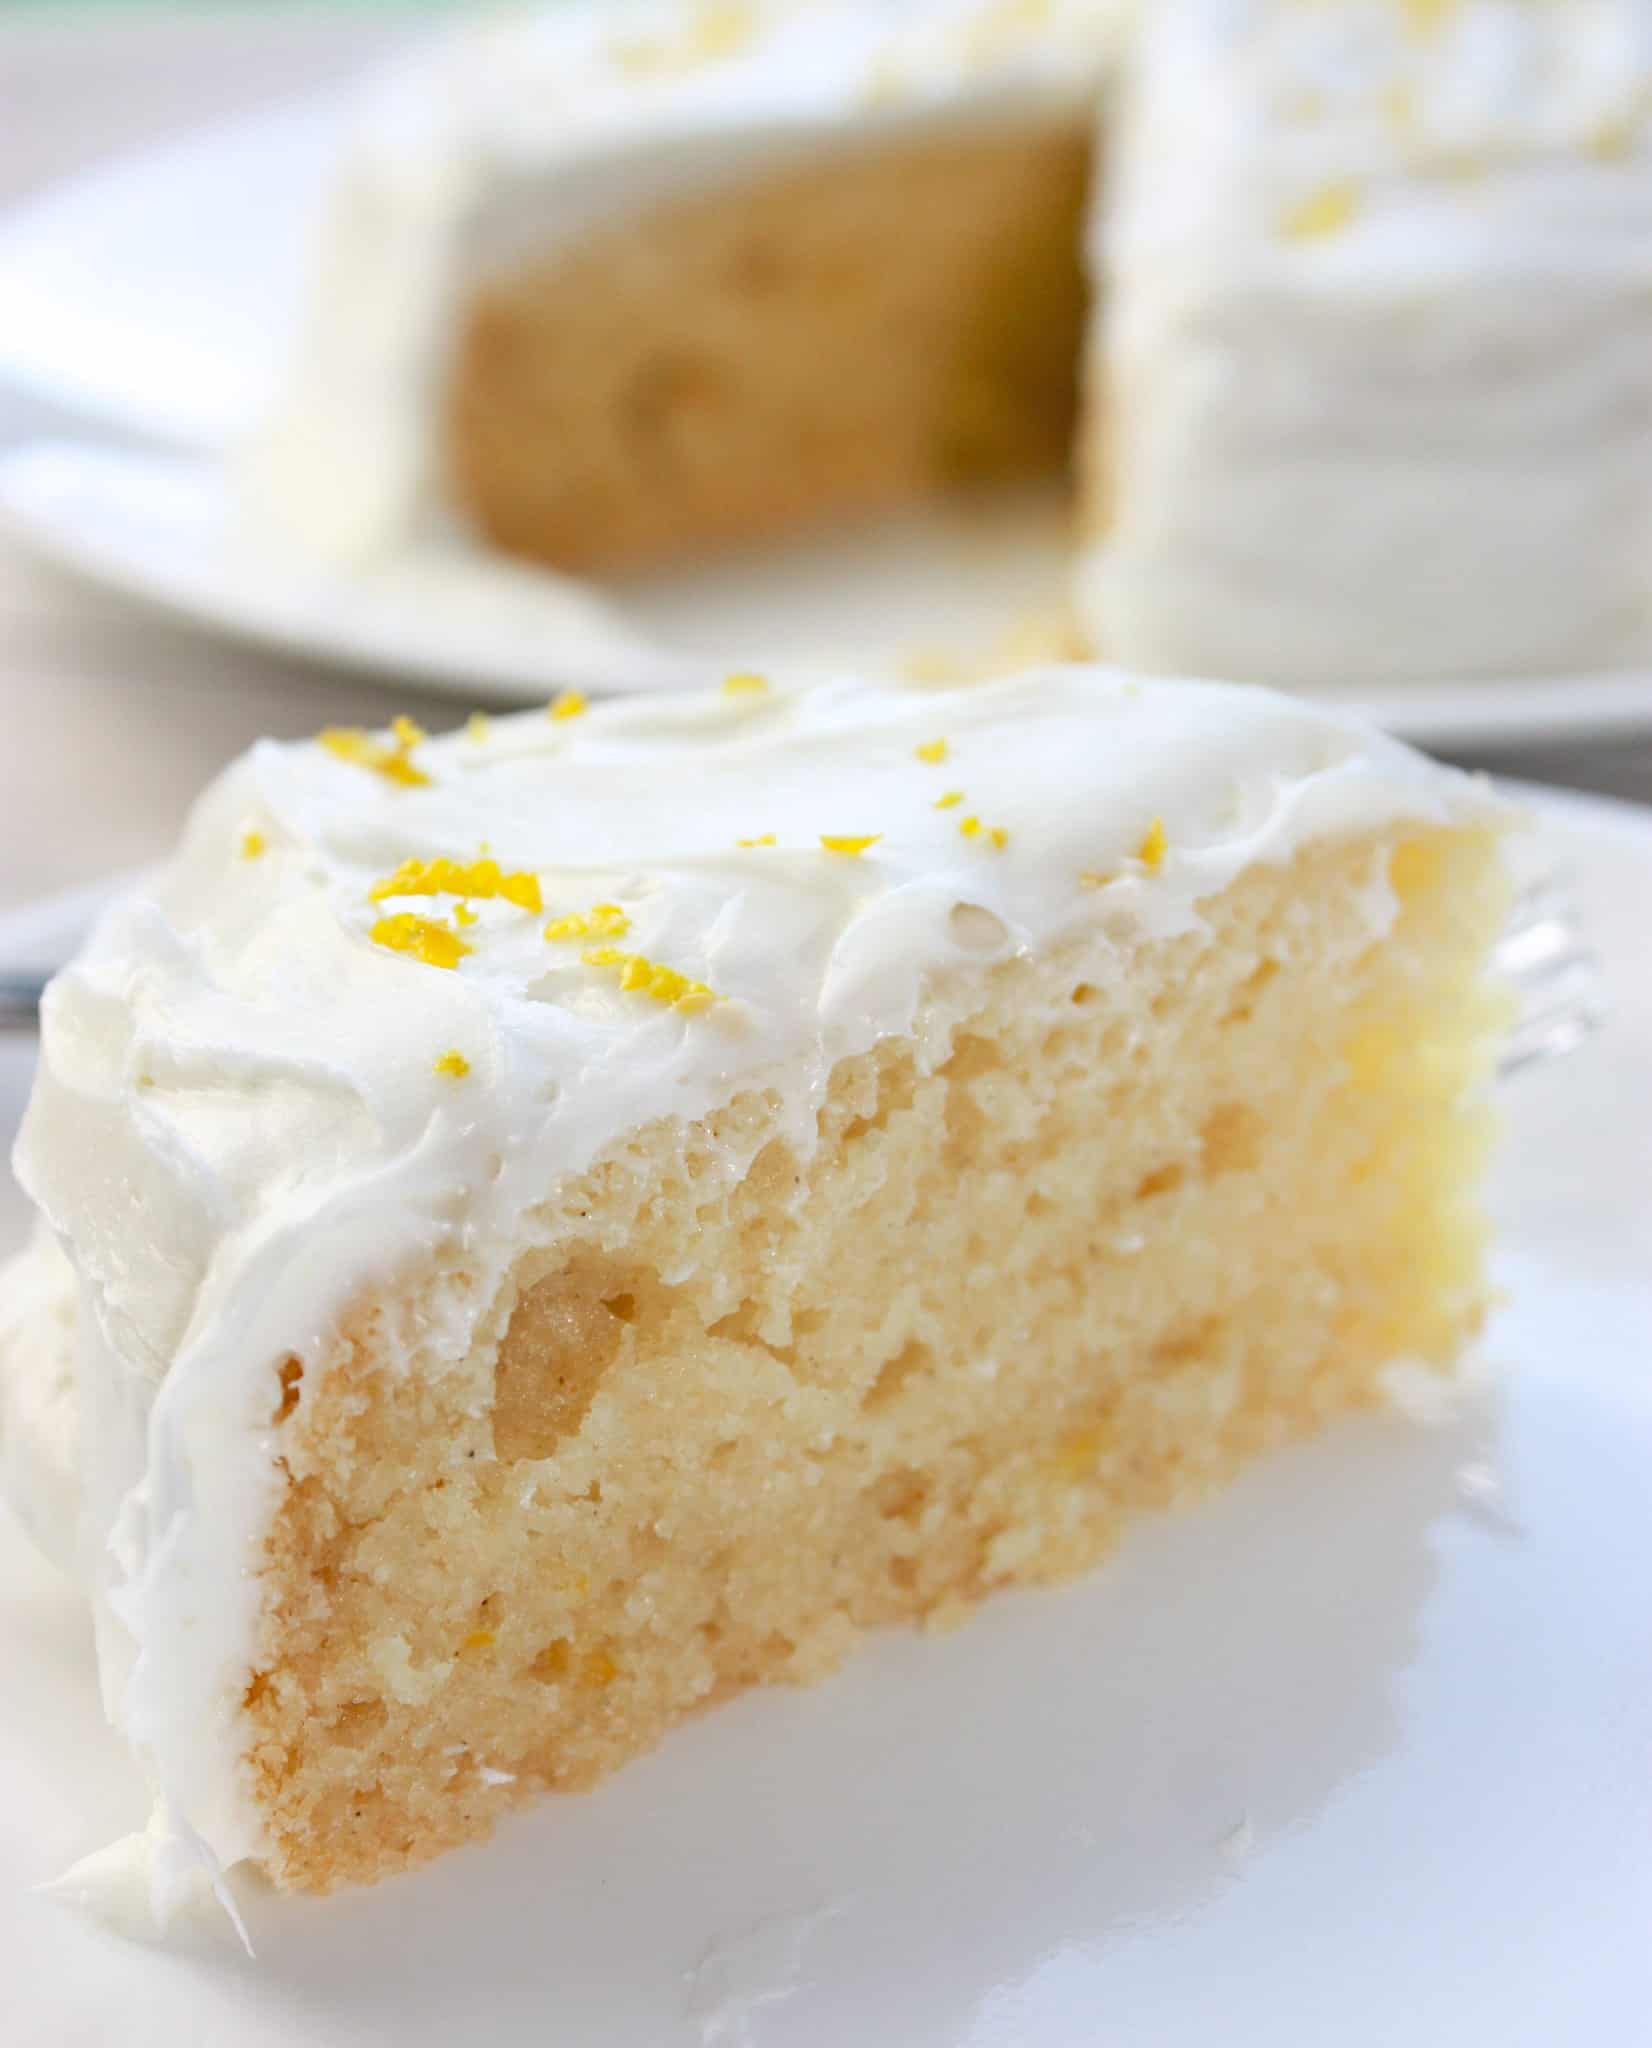 Instant Pot Lemon Cake is another easy pressure cooker recipe that is loaded with citrus flavour.